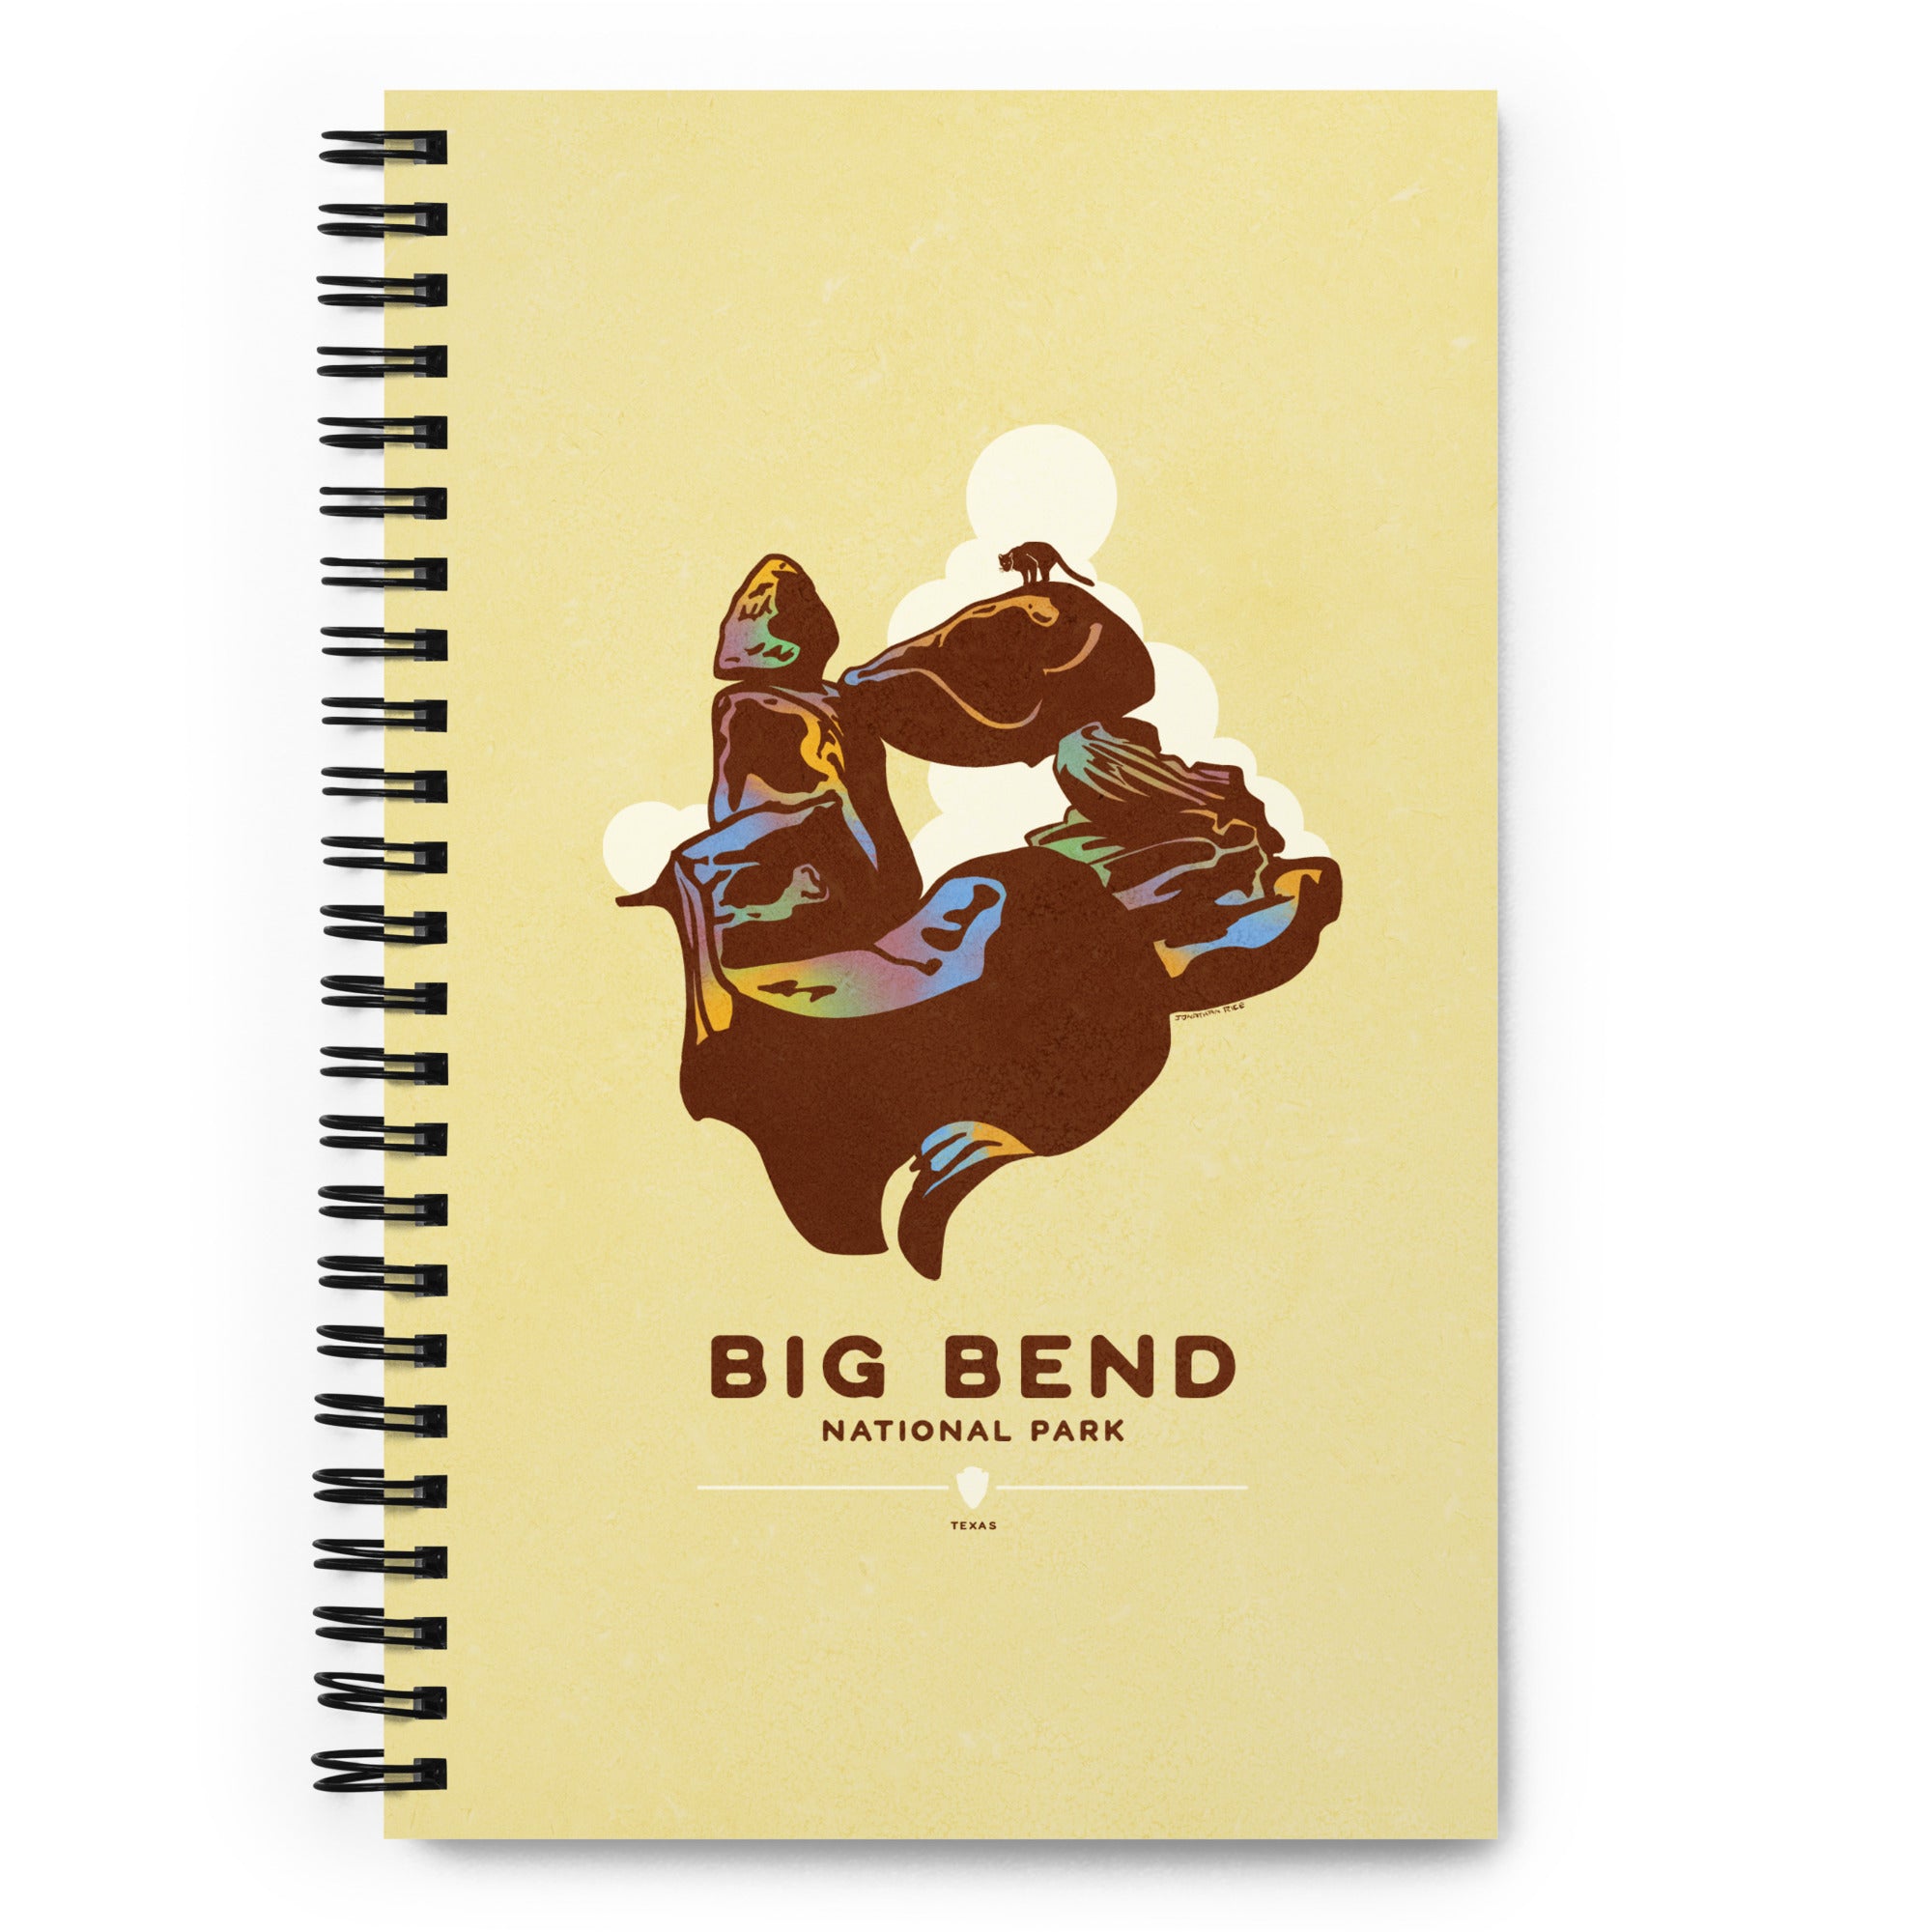 This custom, Big Bend National Park, wire-bound notebook will be a great daily companion whenever you need to put your thoughts down on paper! 